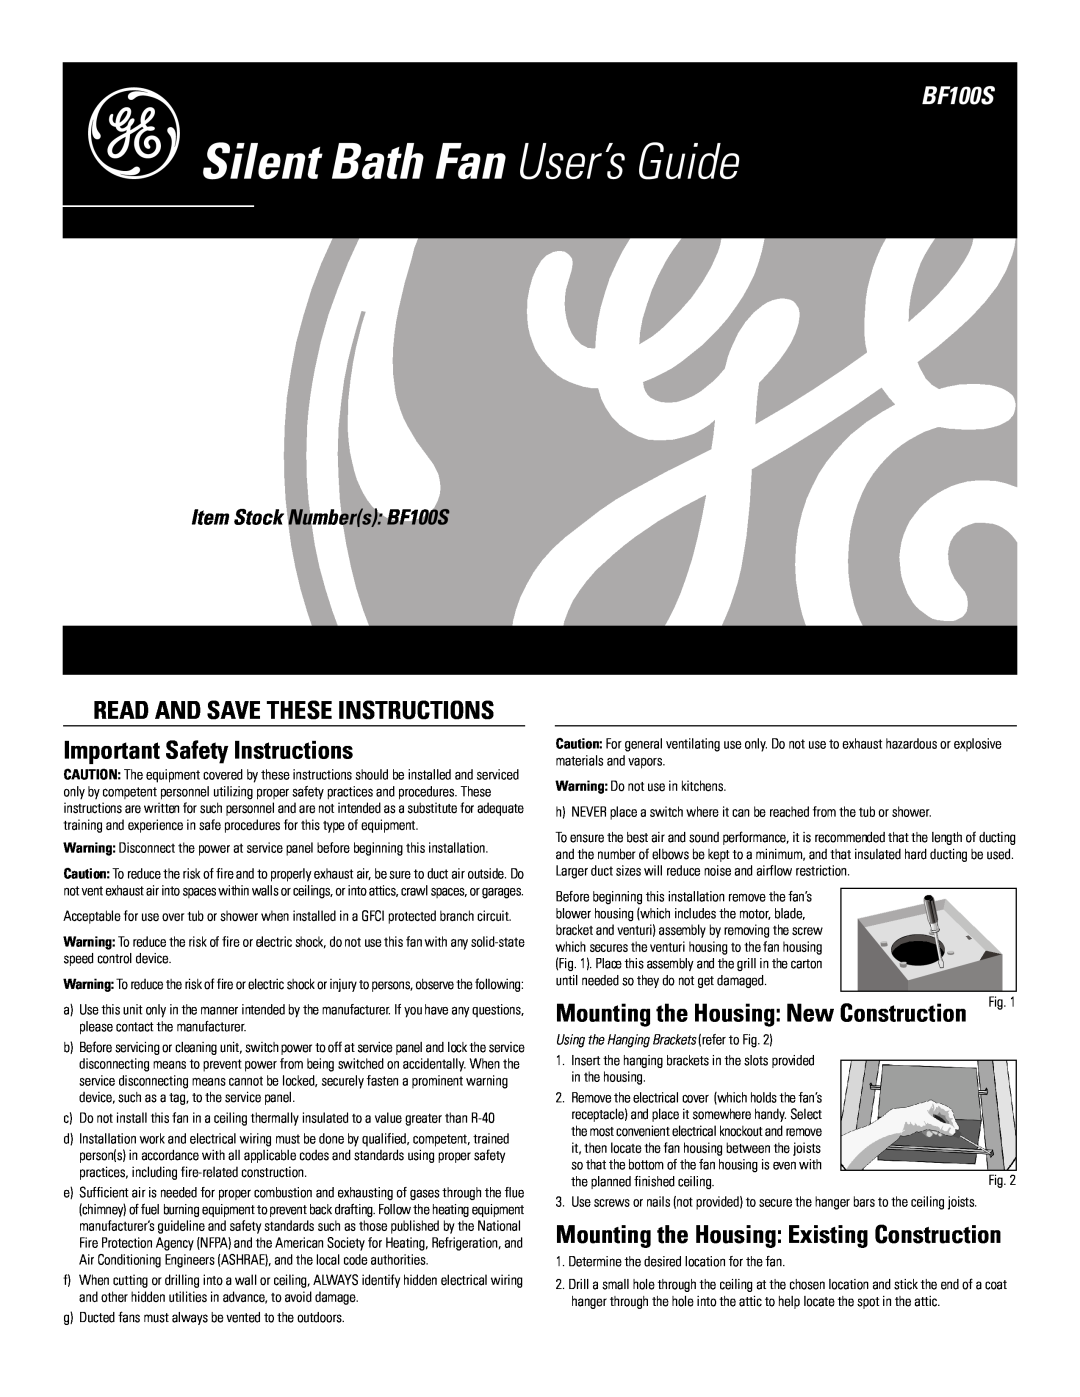 GE warranty Important Safety Instructions, Silent Bath Fan User’s Guide, e BF100S, Read And Save These Instructions 